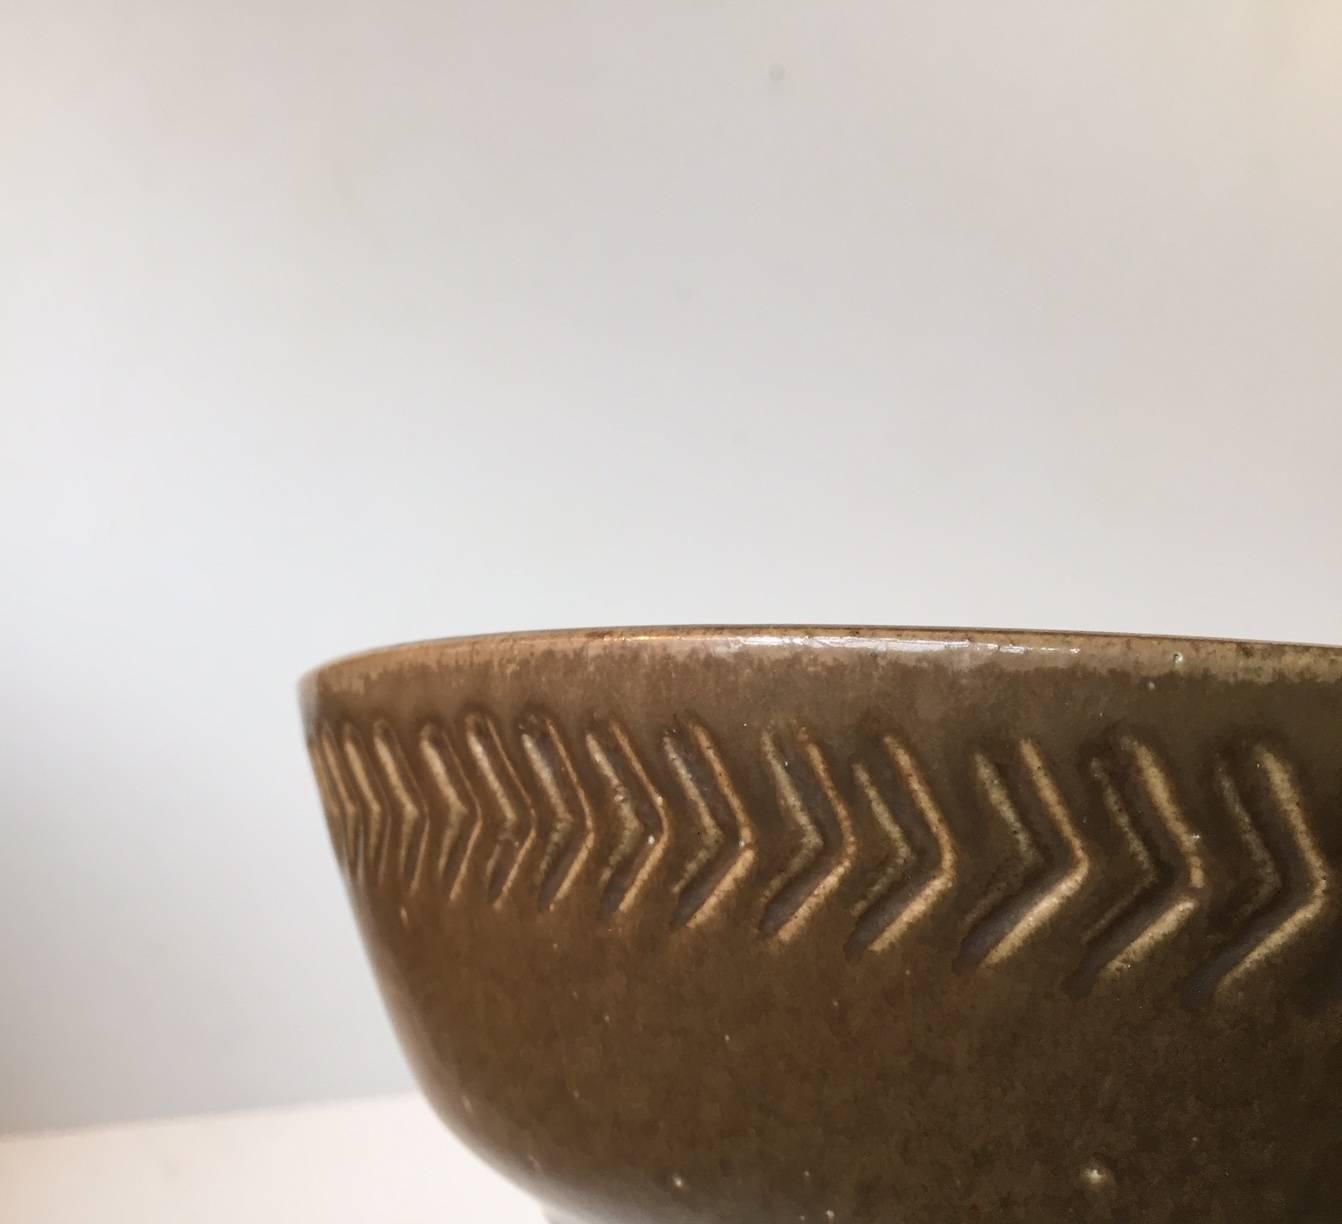 Stoneware bowl designed in 1954 by Swedish ceramist Yngve Blixt and manufactured by Höganäs. Decorated with incised geometric arrow motif around the perimeter on a caramel brown glaze that fades into a soft tone around the edge. This piece is signed